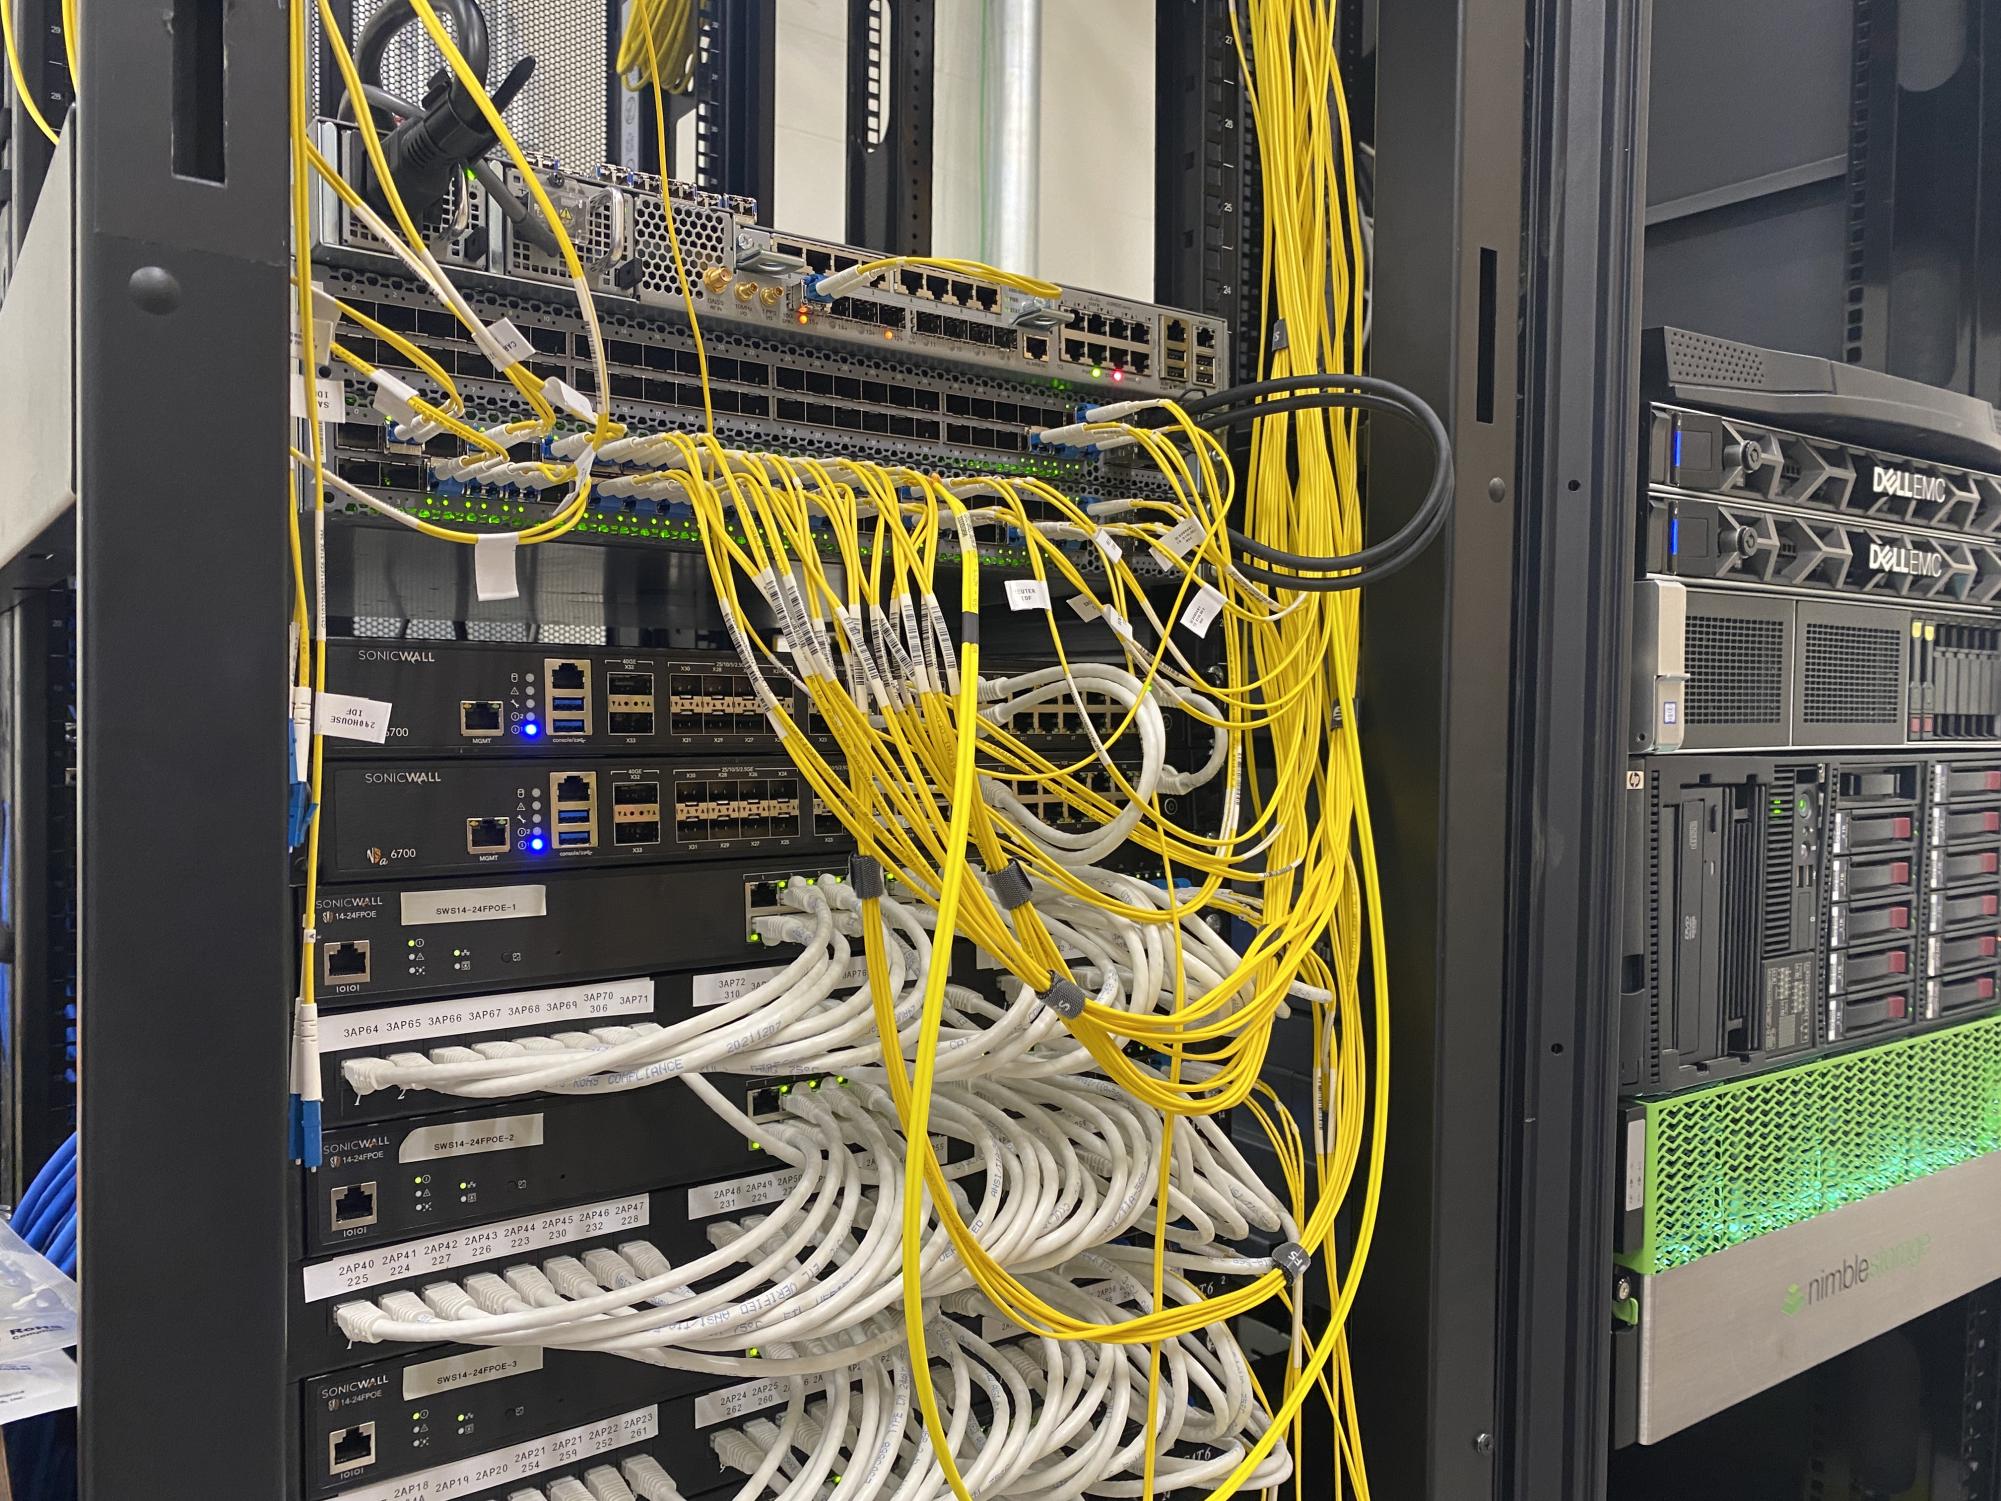 The core switches Wi-Fiber purchased cannot handle the amount of traffic generated by campus users, causing occasional crashes crash, according to Chief Information Officer Katrina Yeung.